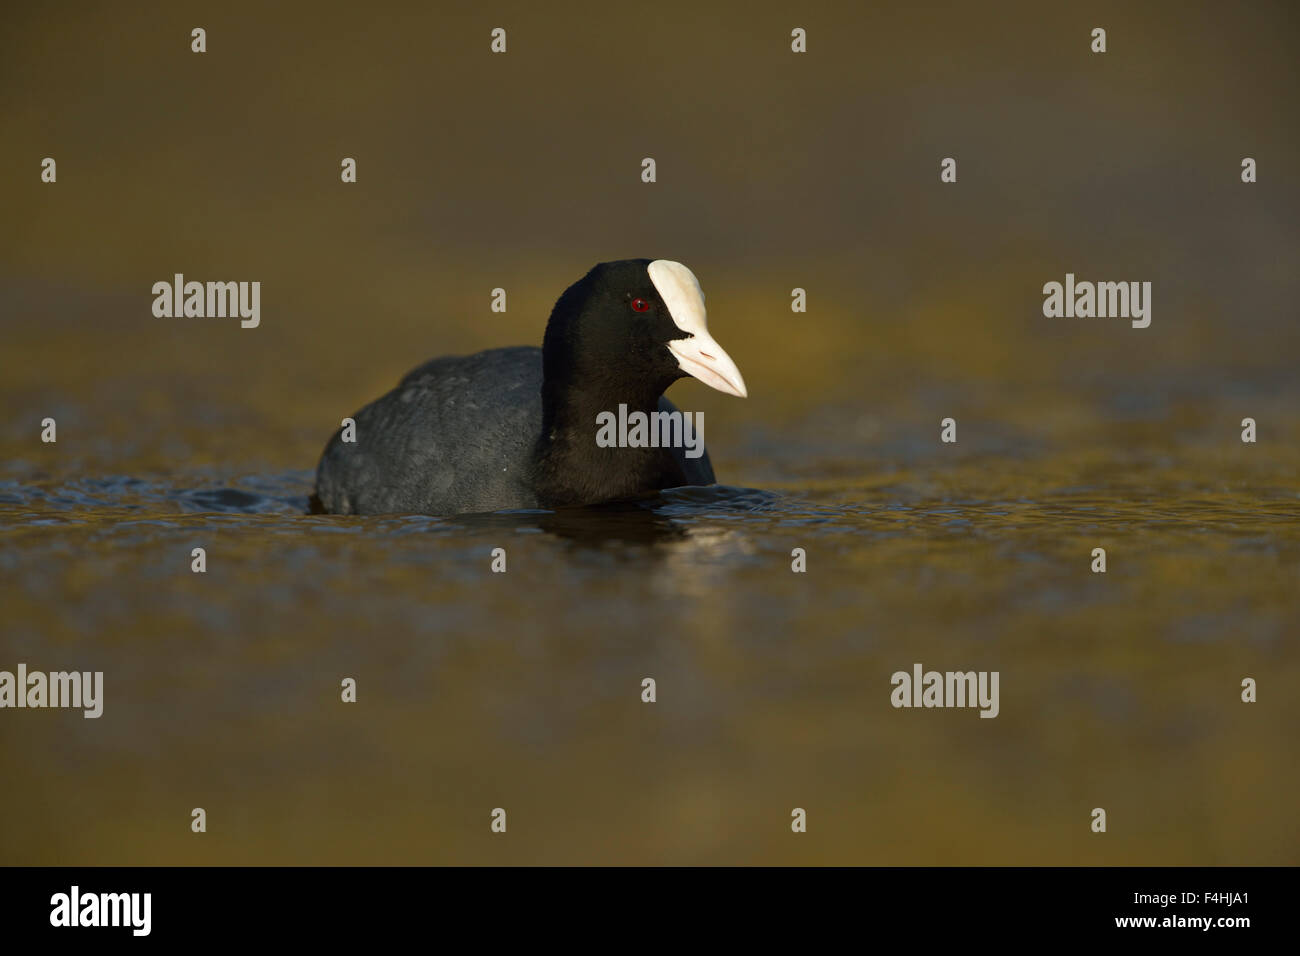 Fulica atra / Black Coot / Blaesshuhn / Blaessralle swimming on nice colored water. Stock Photo